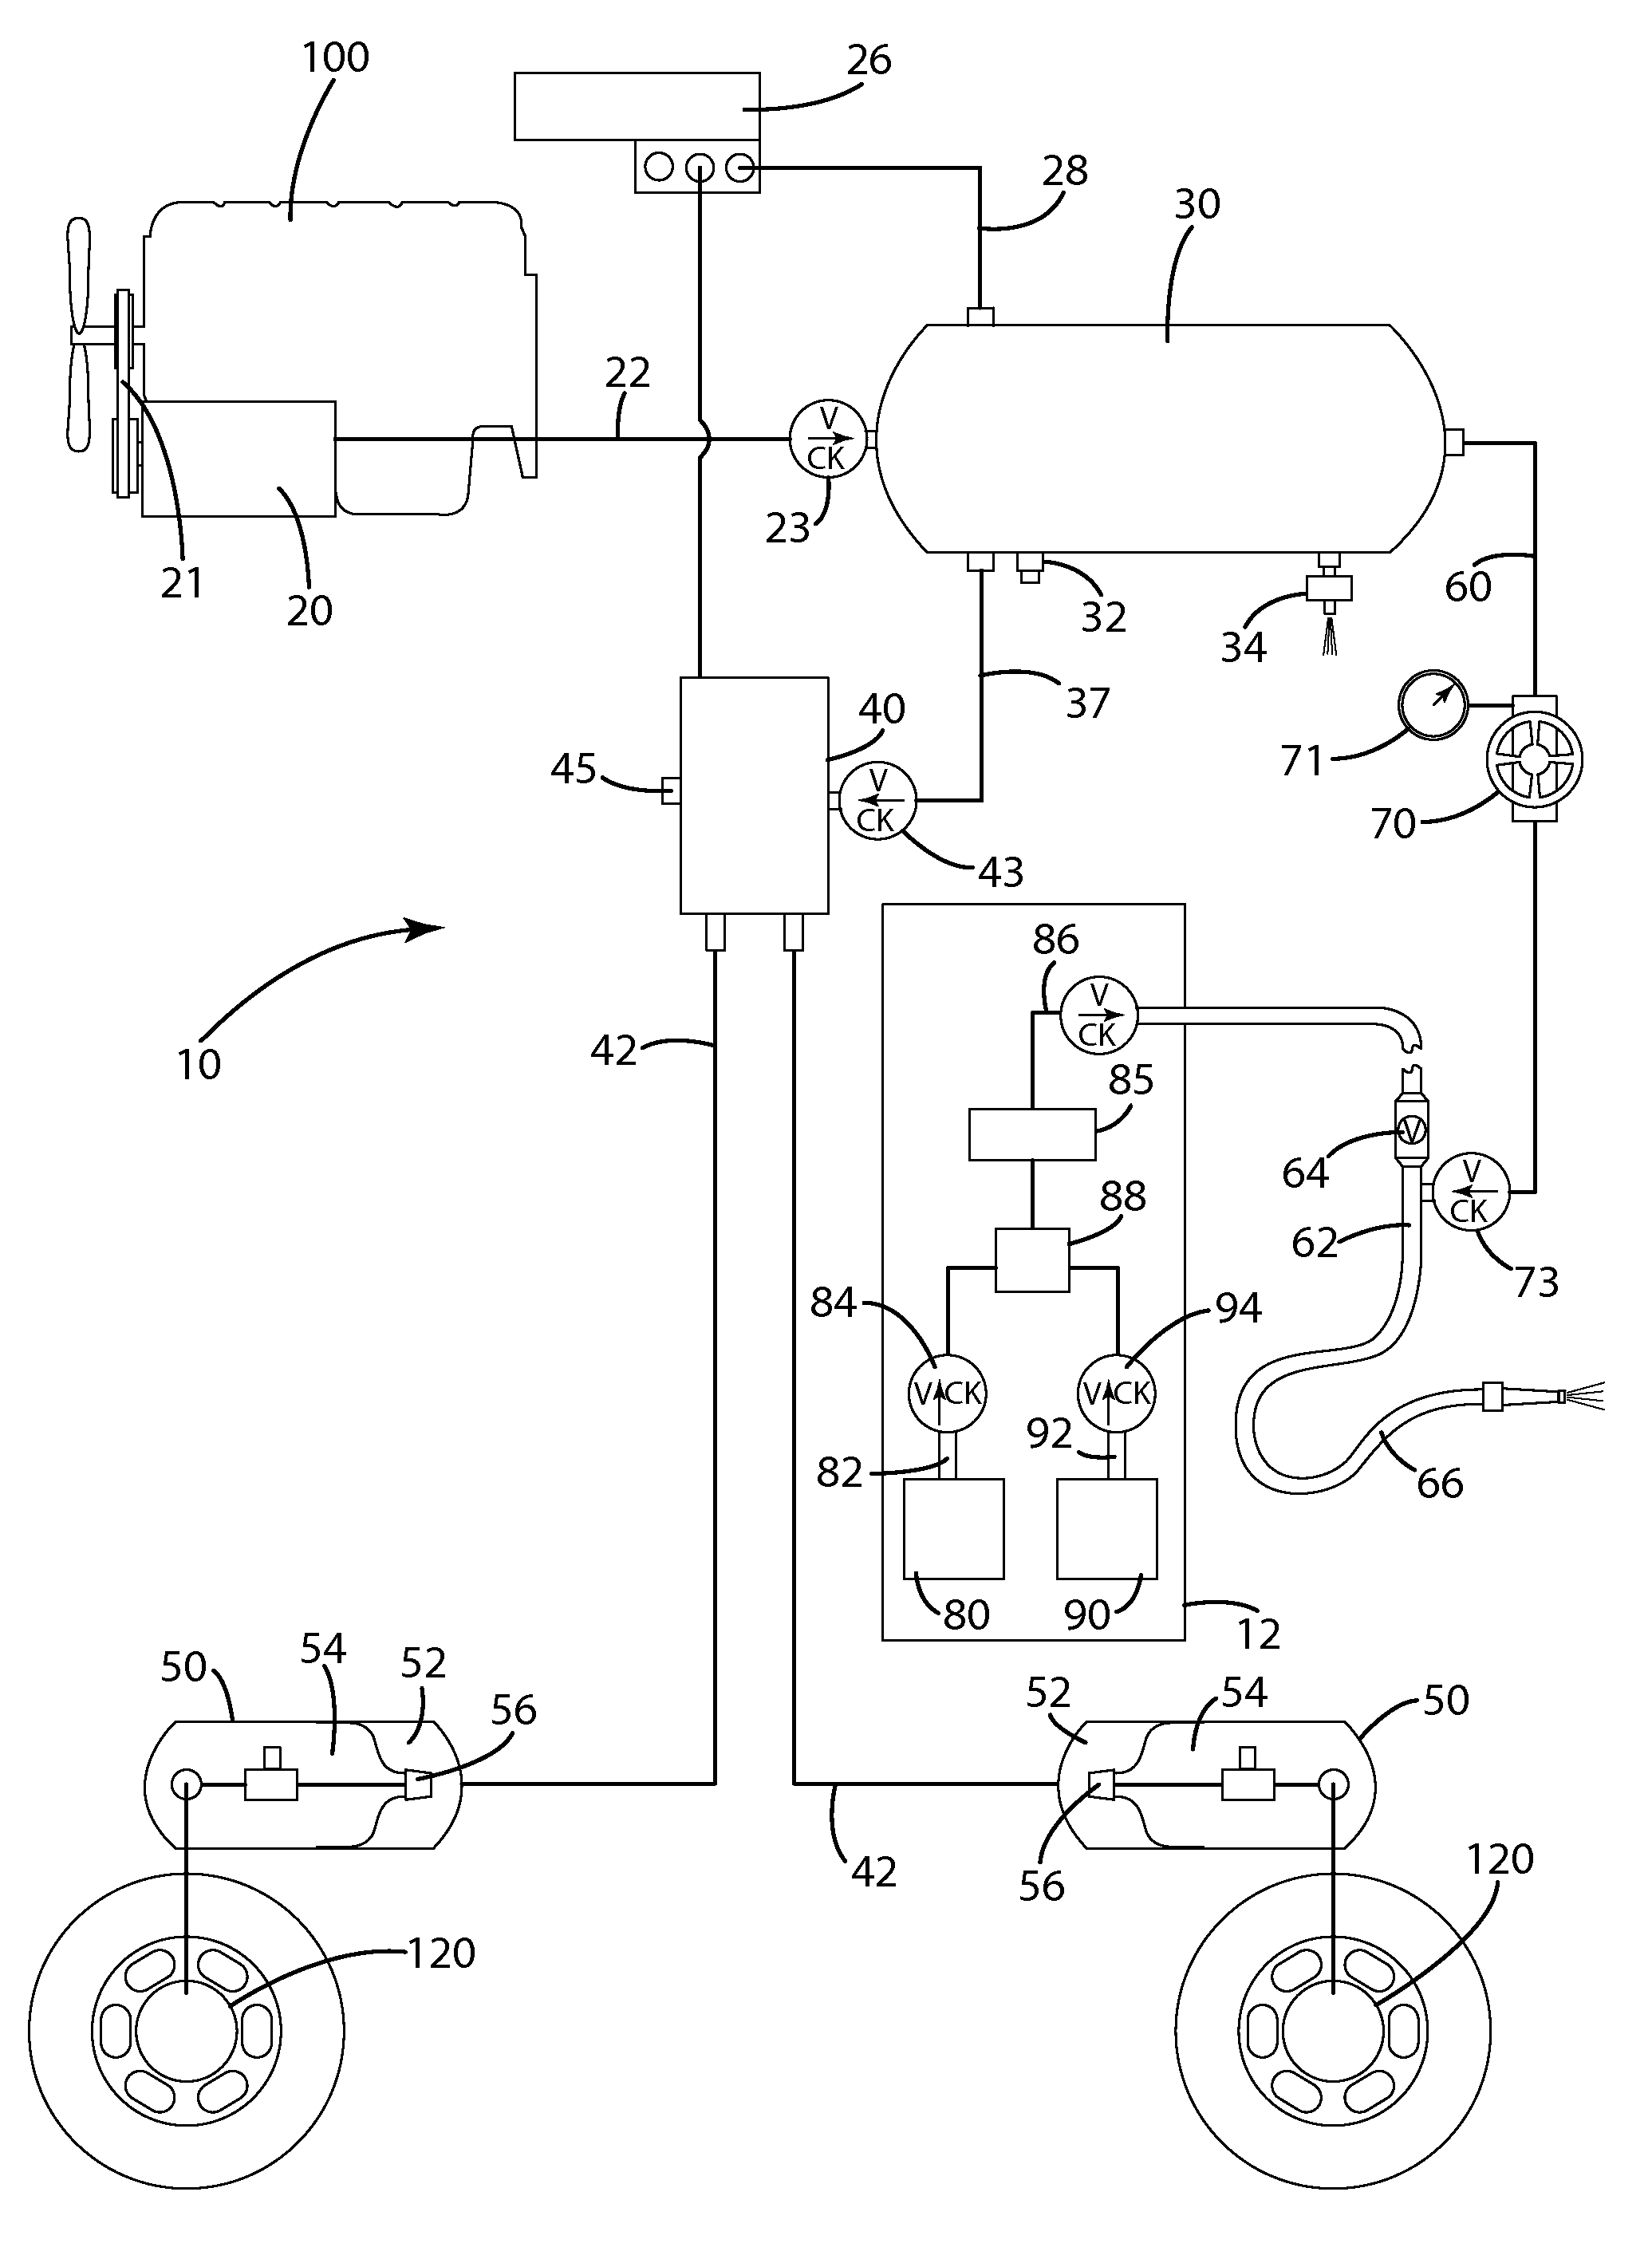 Compressed fluid system and related method